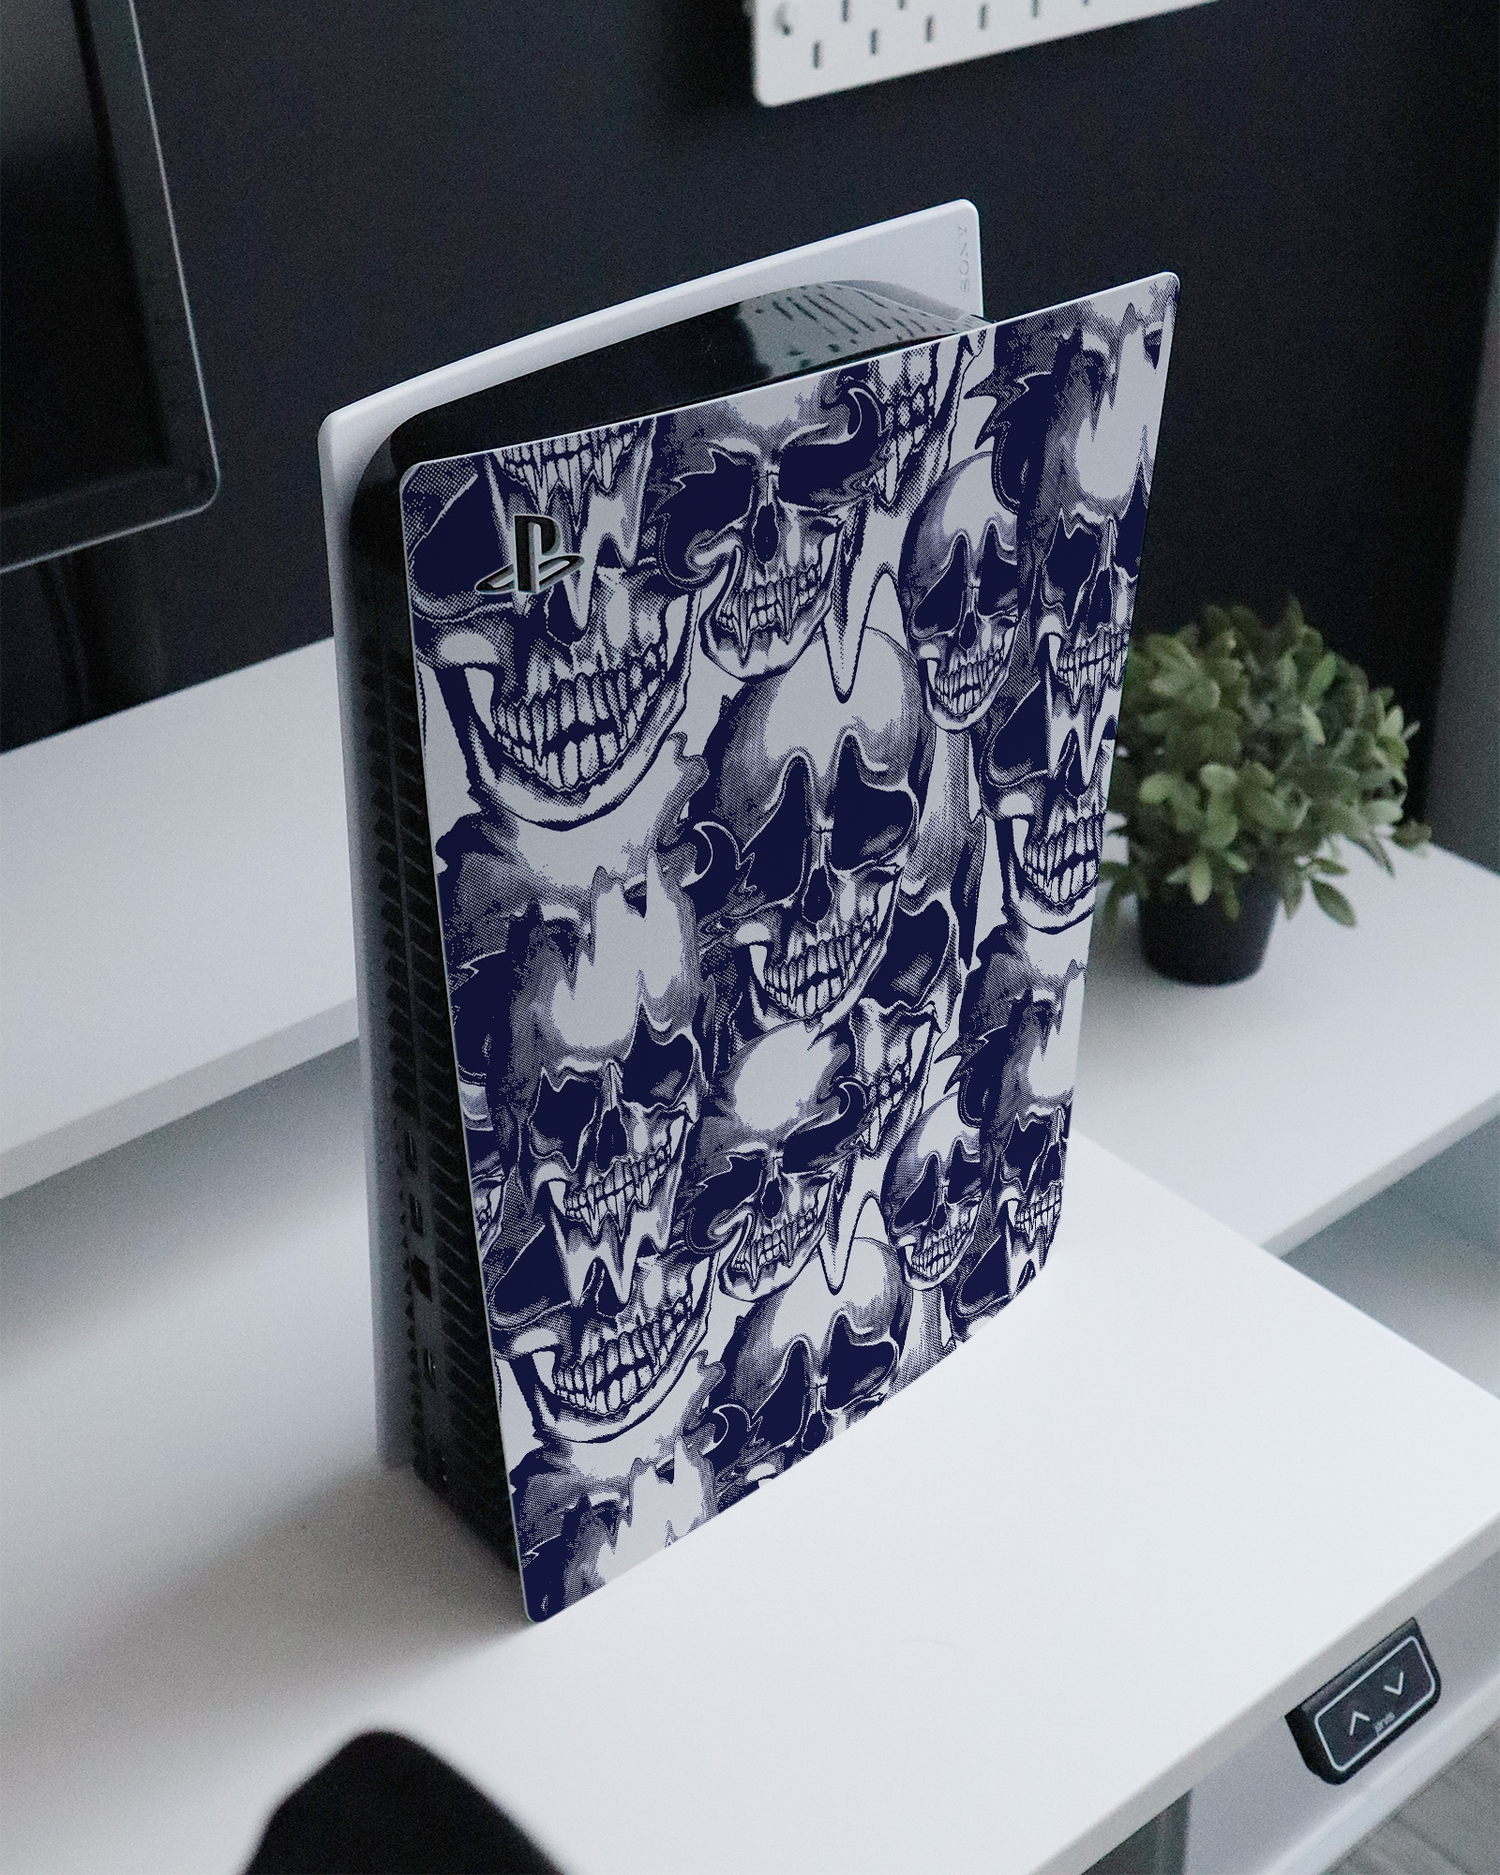 Warped Skulls Console Skin for Sony PlayStation 5 Digital Edition standing on a sideboard 